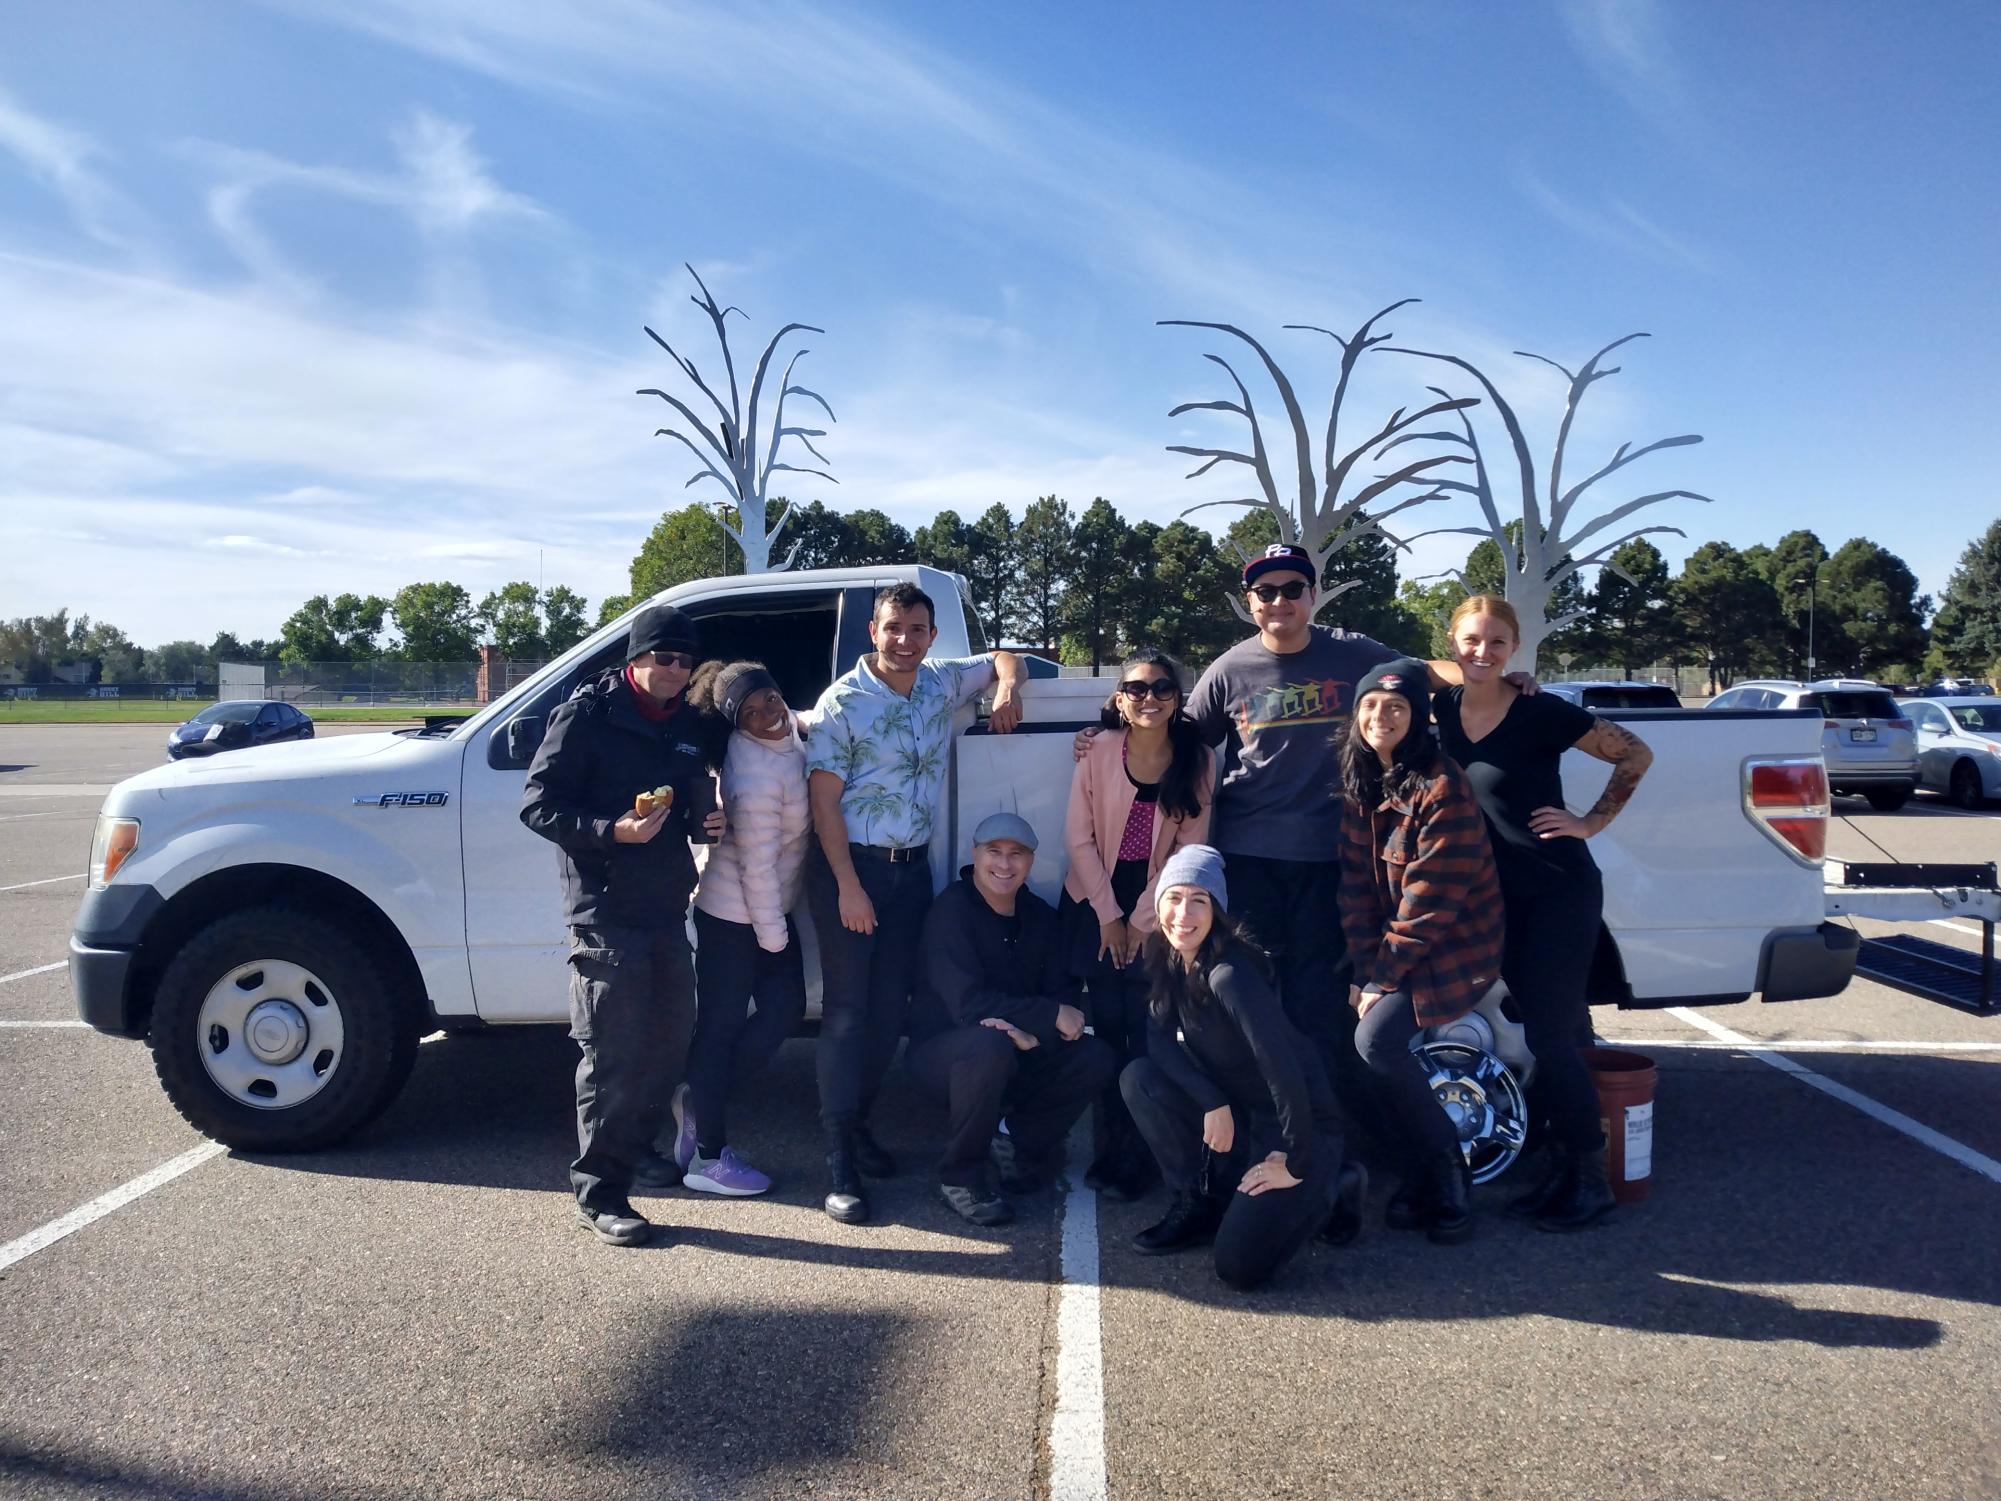 From left to right: Stuart Barr, Jasmyne Pierce, Christian Ray Robinson, Justin Walvoord, Iliana Barron, Shannon Altner, Grant Bowman, Adara Baltazar, and Chloe McLeod pose for a post-play photo in front of the scene-ready truck. 